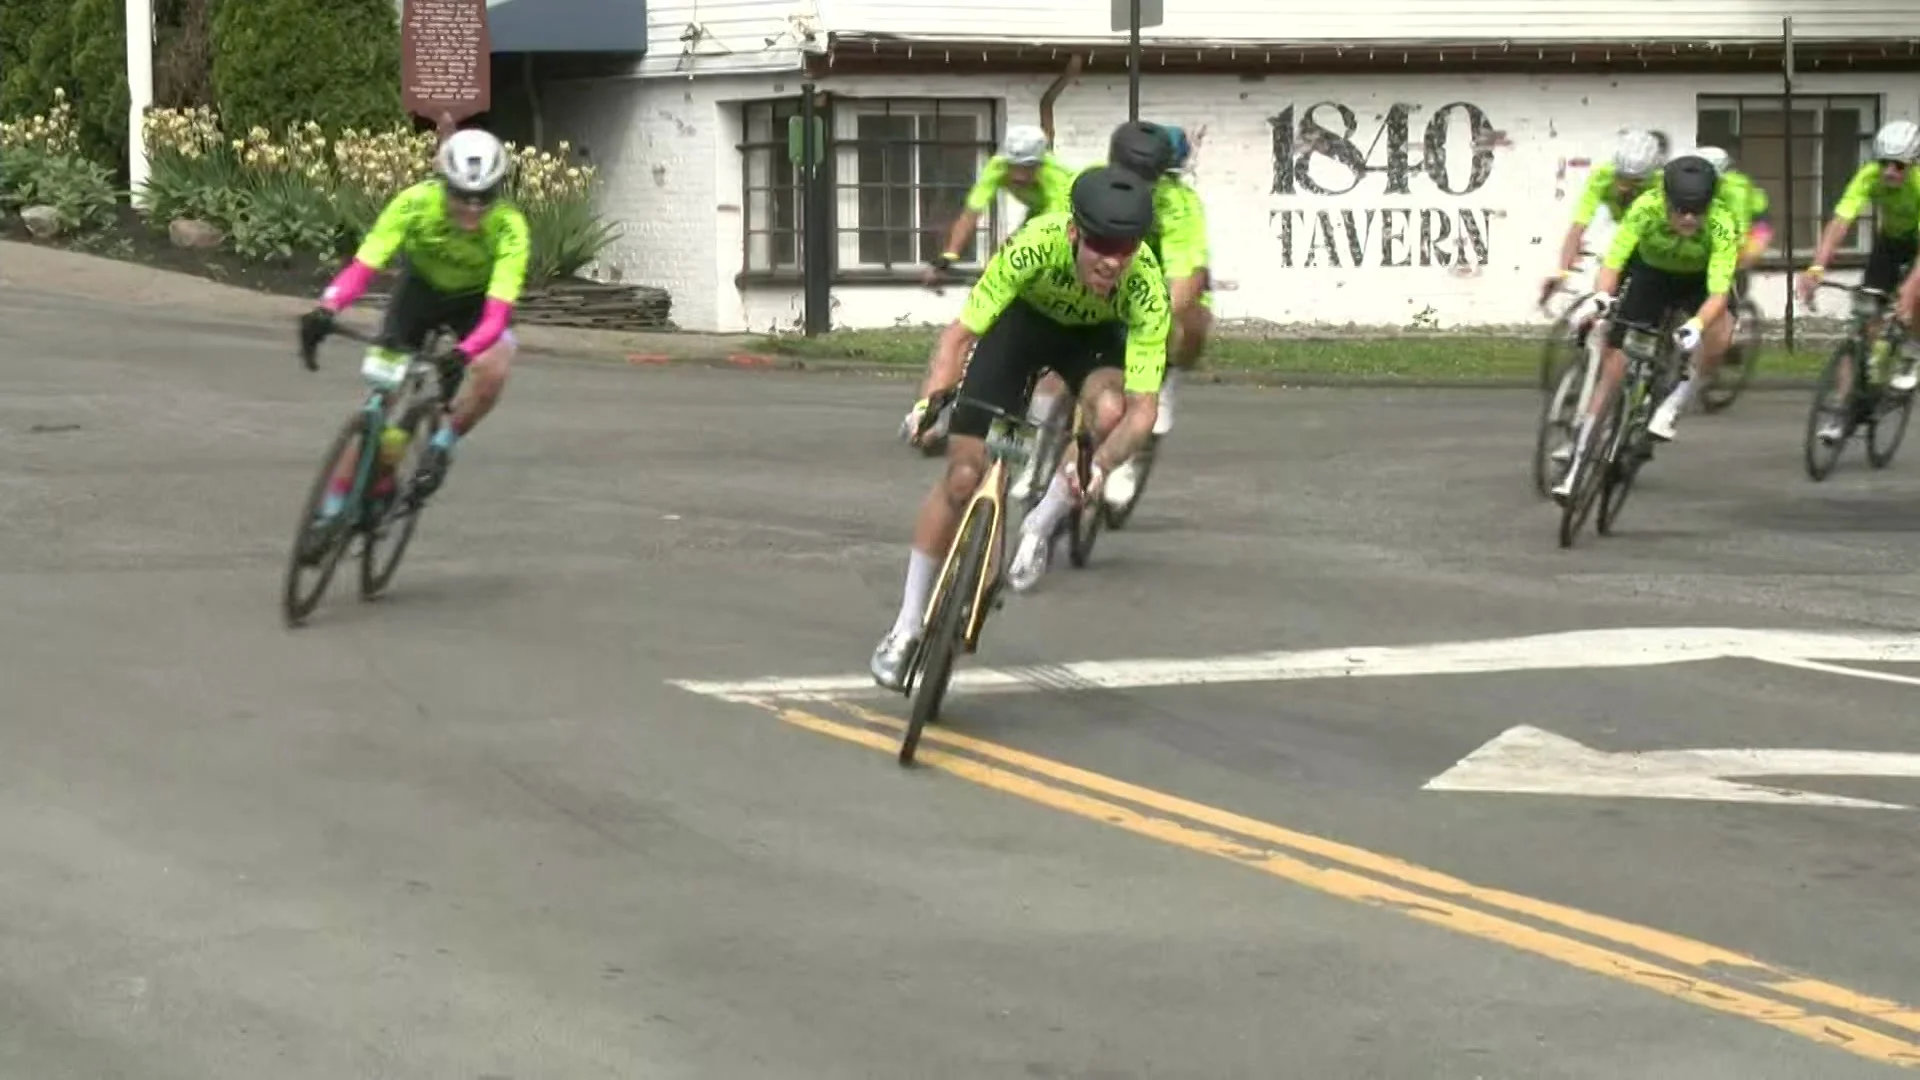 Rockland featured as part of the Gran Fondo World Championship cycling route